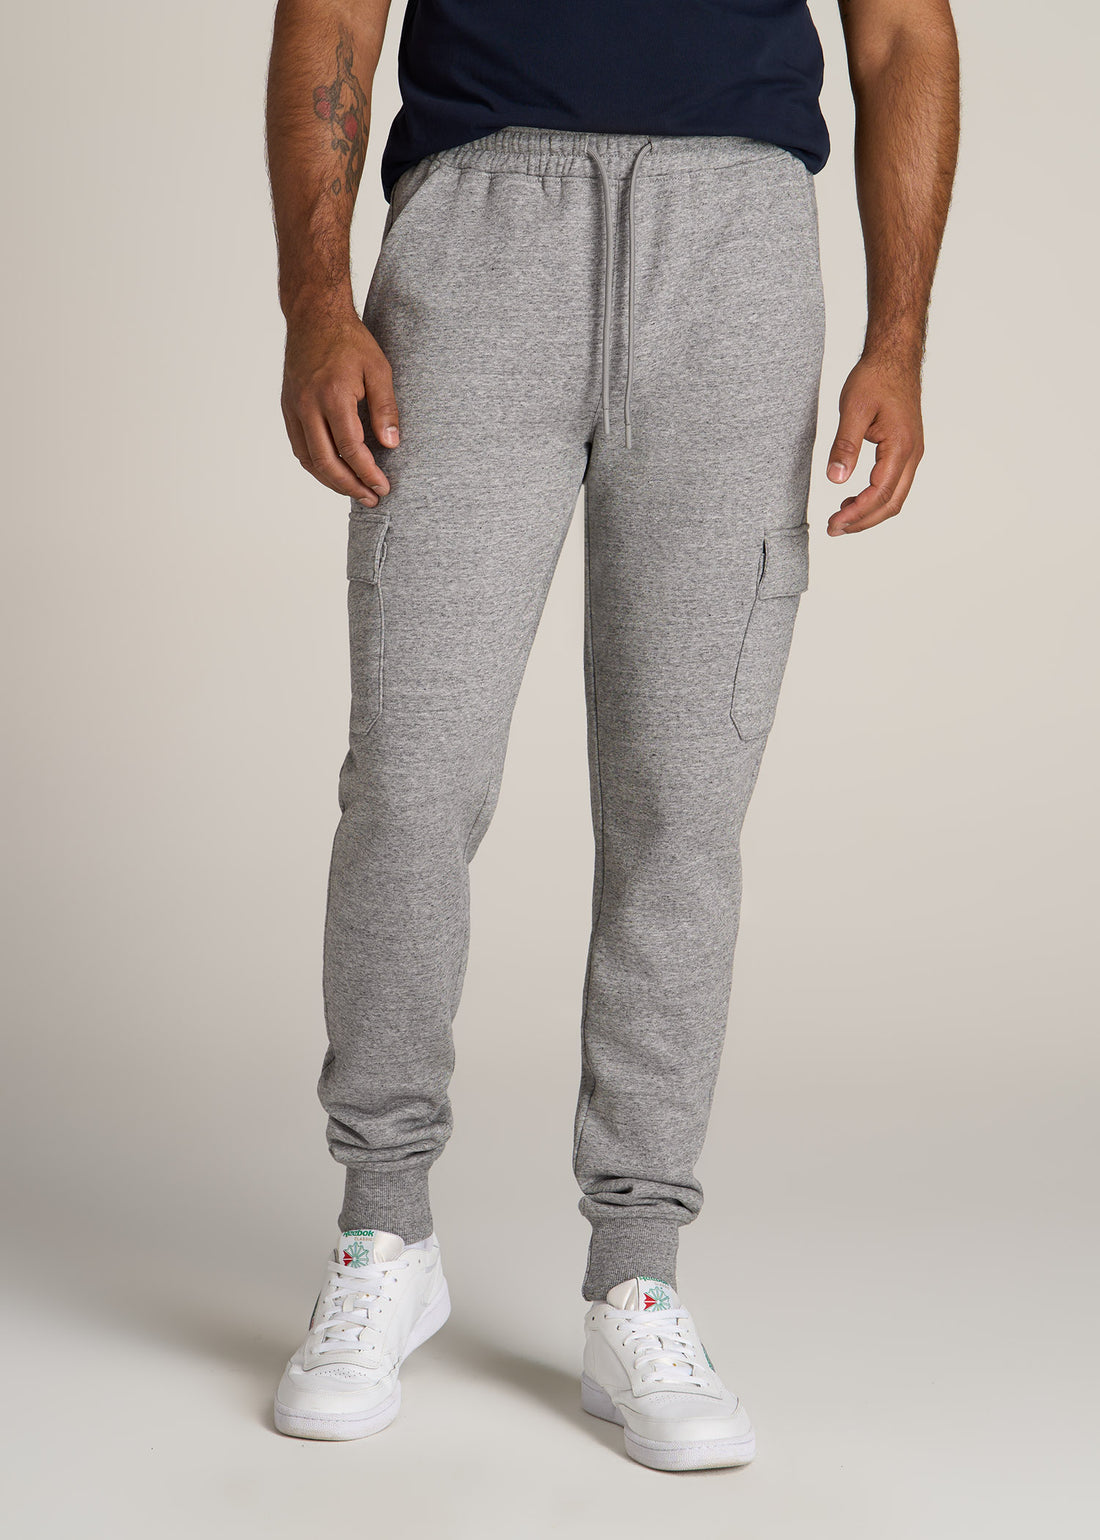 Five Tips For How To Wear Jogger Pants  How to wear joggers, Joggers outfit,  Fashion joggers